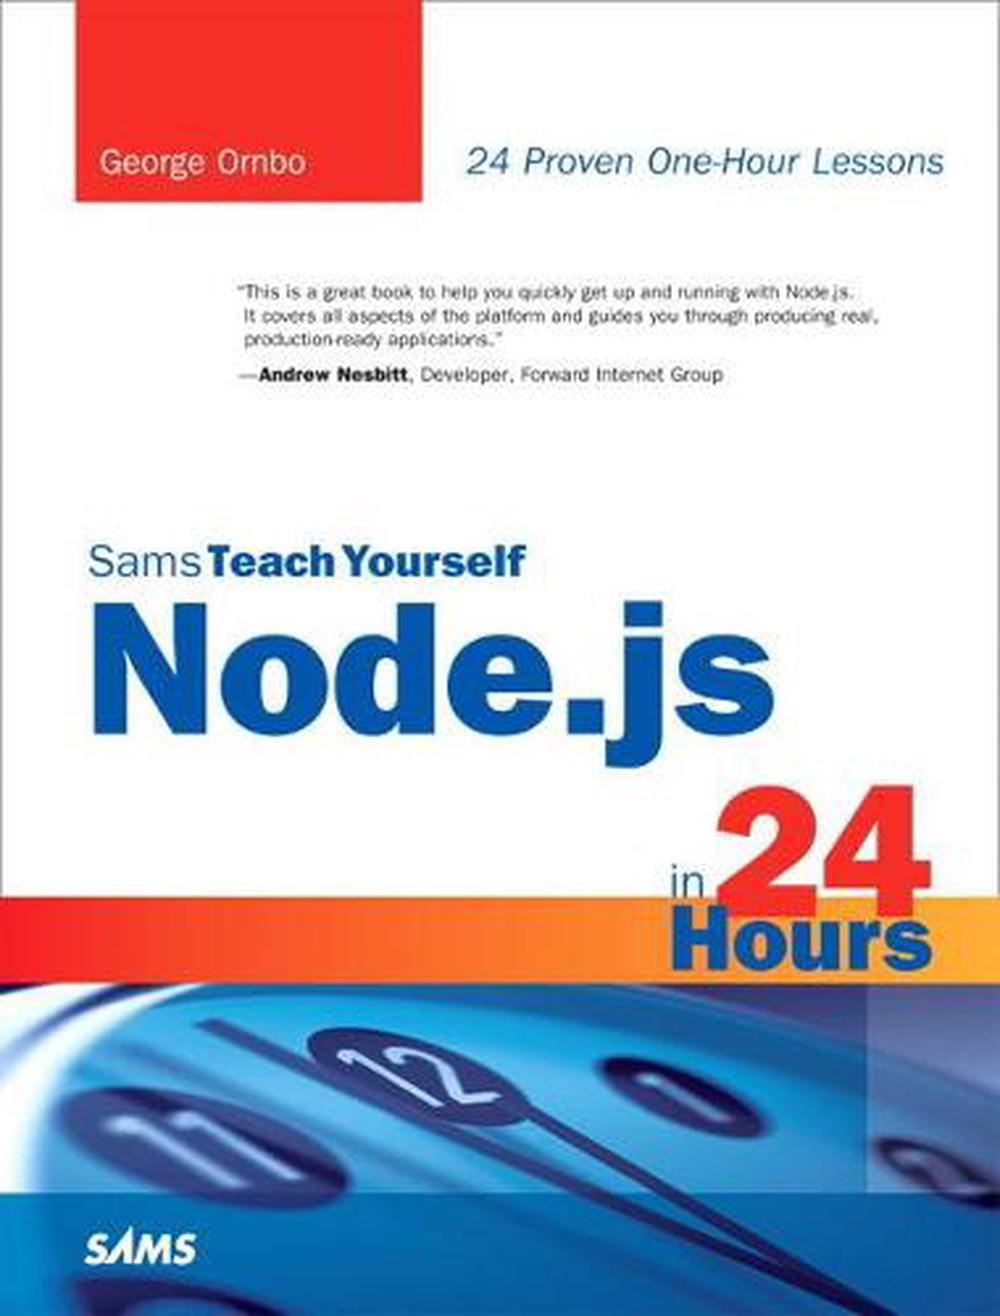 Sams Teach Yourself Node.js in 24 Hours by Ornbo (English) Paperback Book 9780672335952